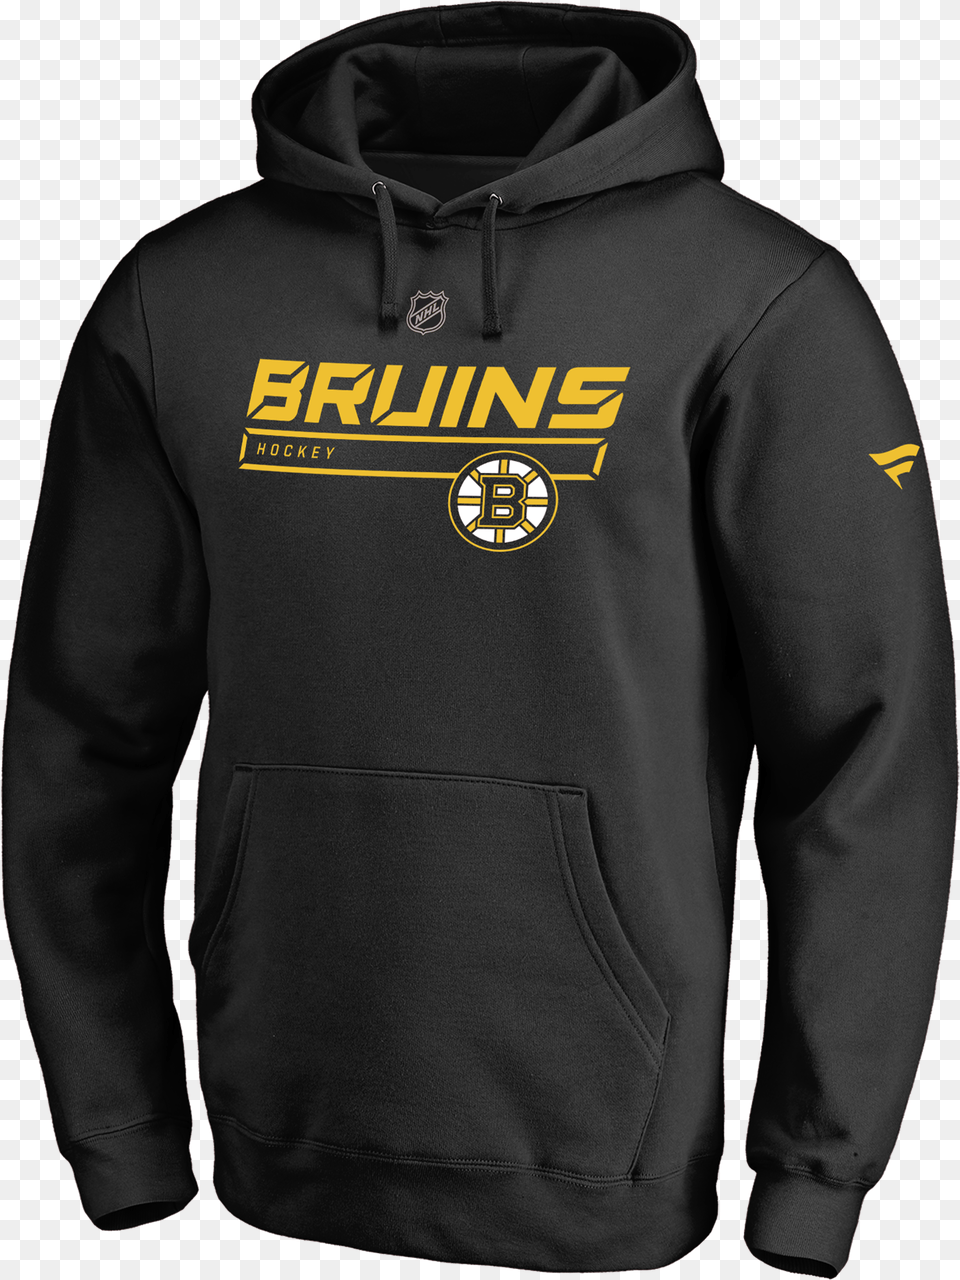 Picture Of Men39s Nhl Boston Bruins Authentic Pro Rinkside Ohio State Rose Bowl 2019 Sweatshirt, Clothing, Hoodie, Knitwear, Sweater Free Transparent Png